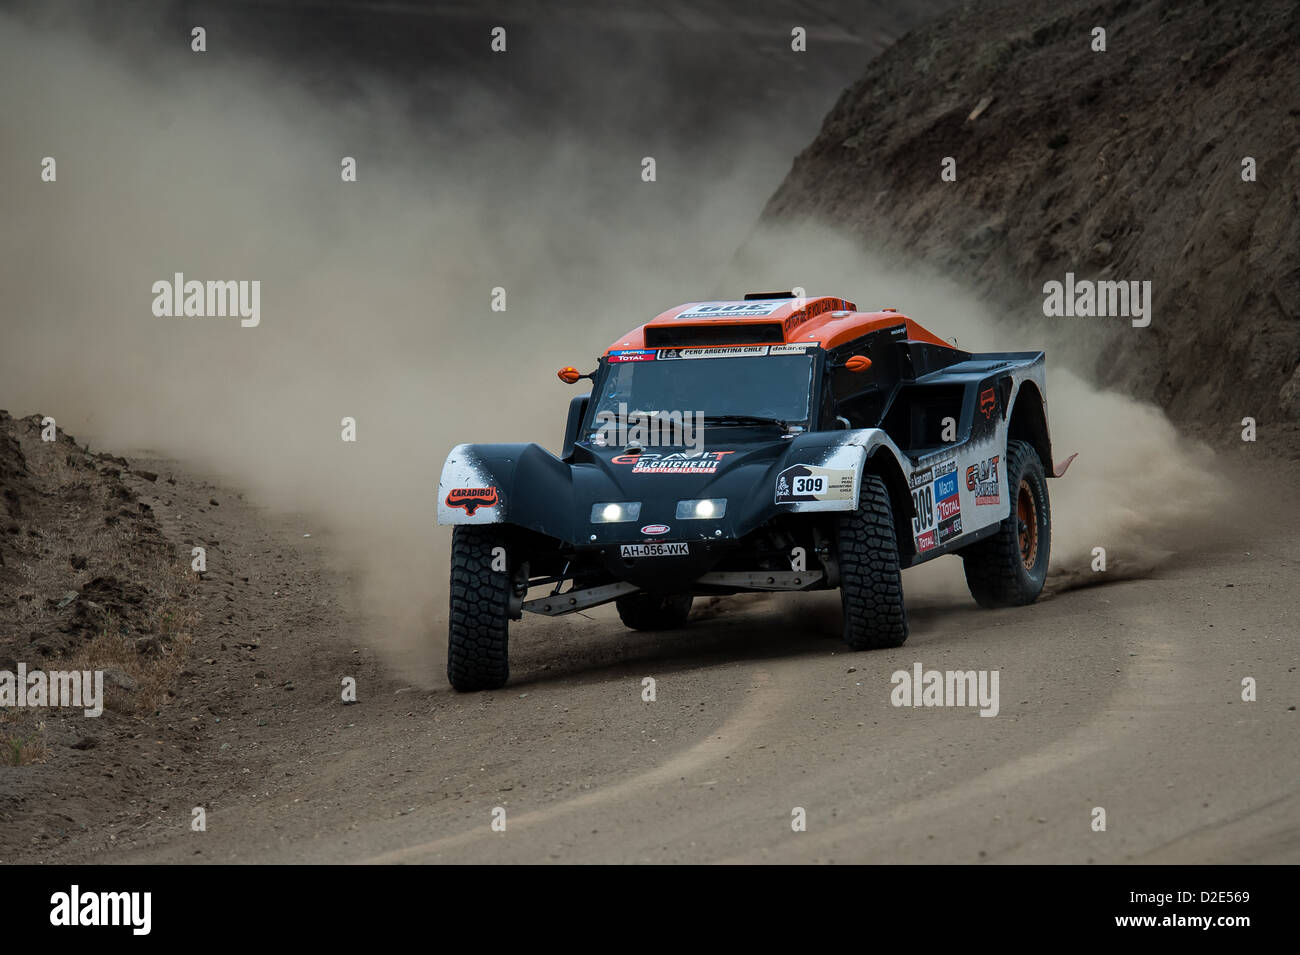 309 Guerlain Chicherit France Buggy SMG, 8th place overal ranking car 2013  Stock Photo - Alamy